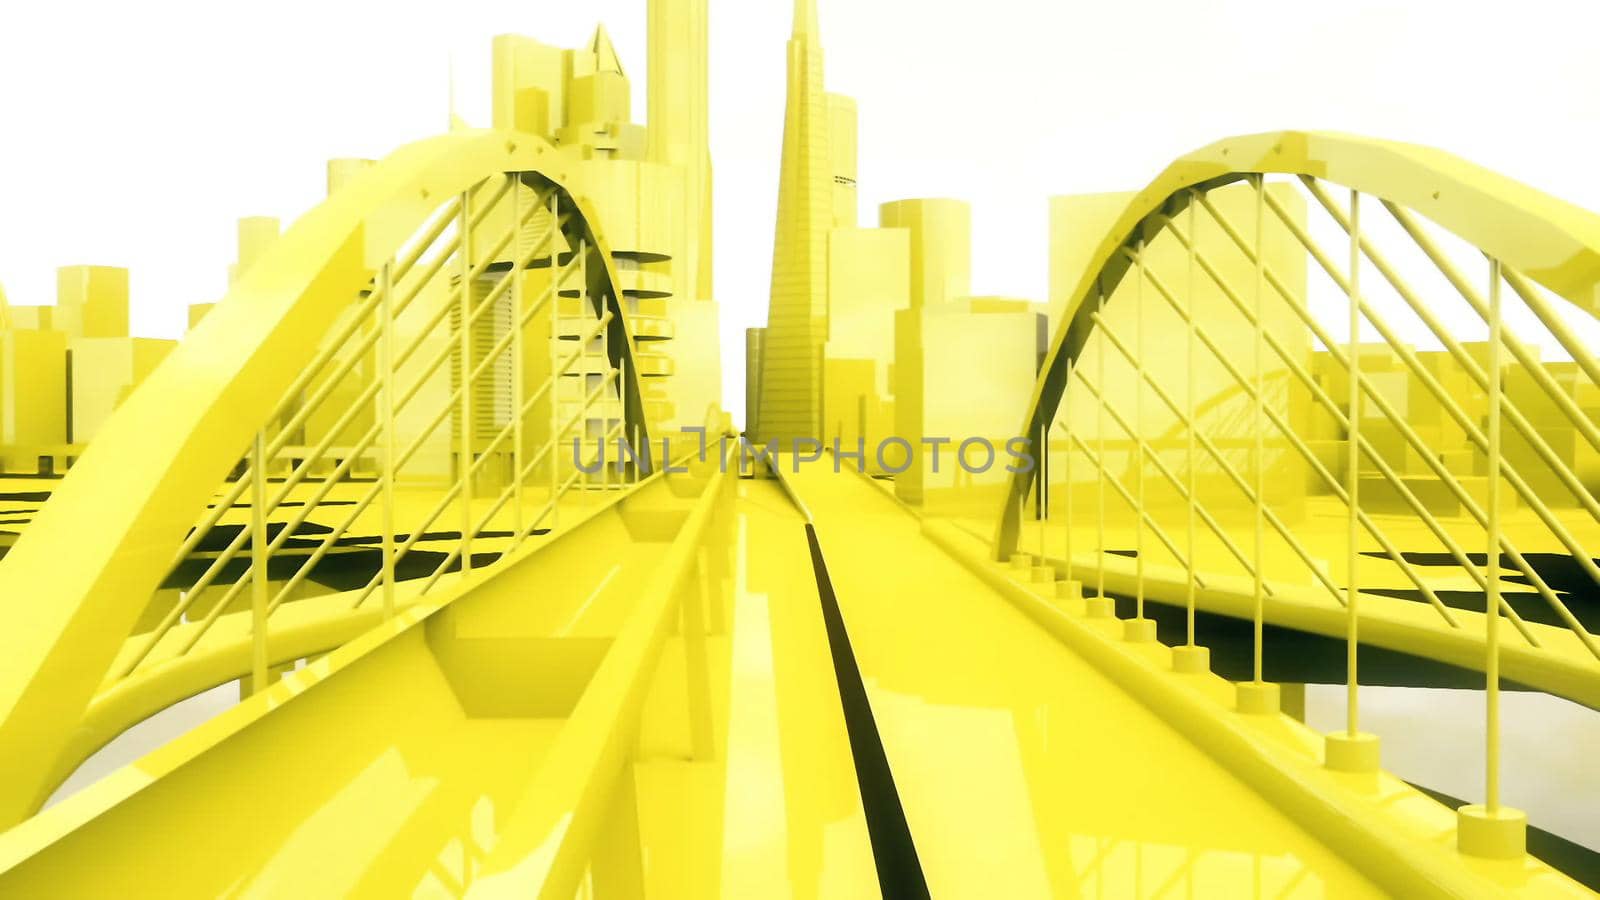 scene of the urban yellow city buildings 3D rendering by designprojects